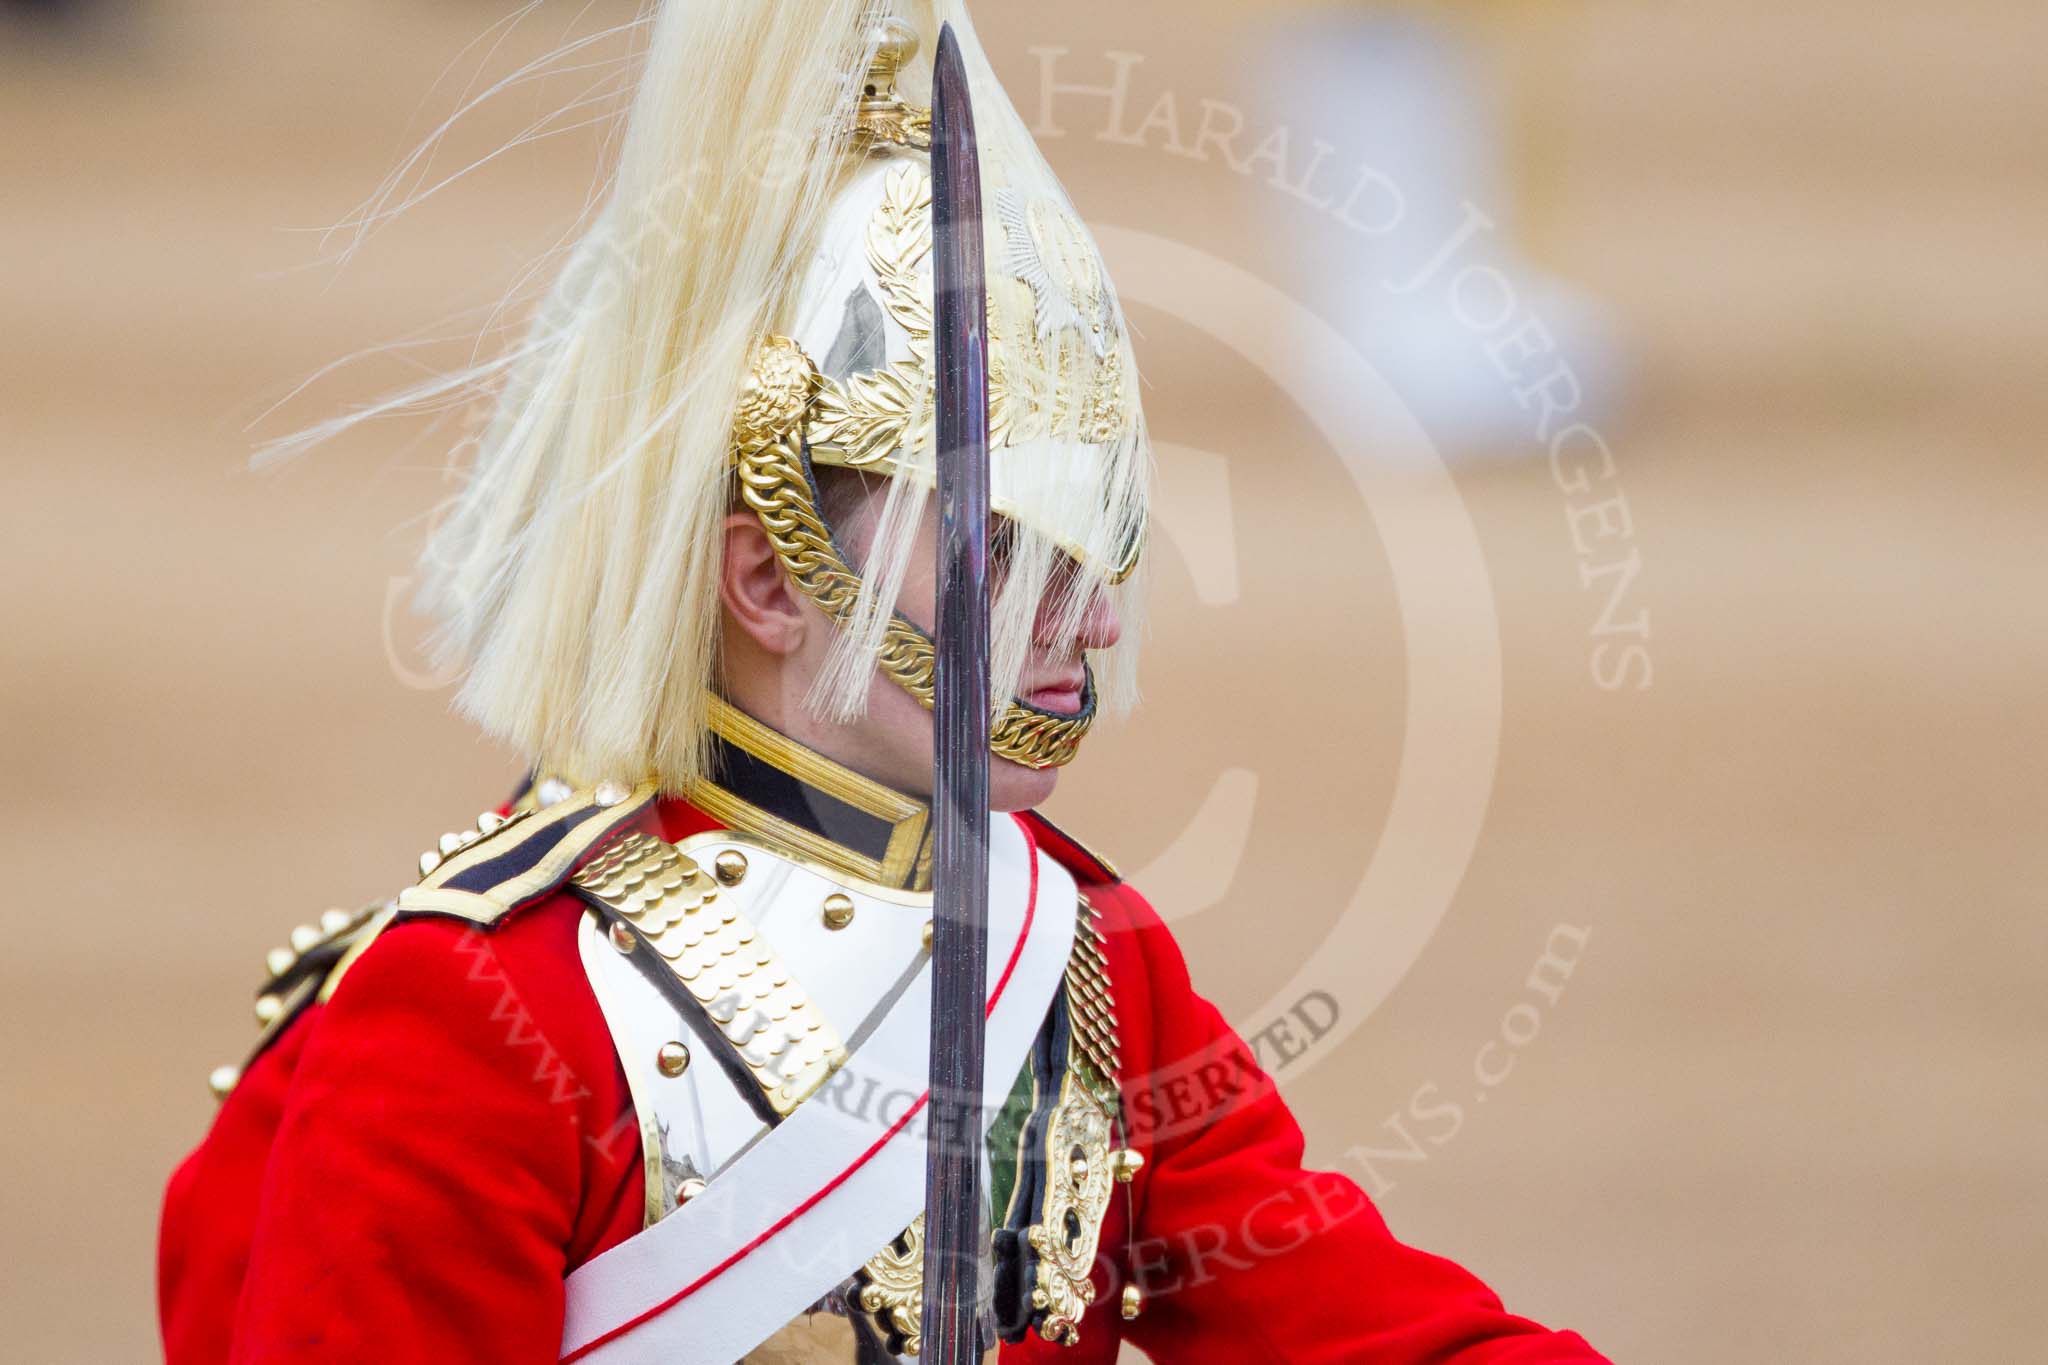 Trooping the Colour 2015. Image #234, 13 June 2015 10:58 Horse Guards Parade, London, UK